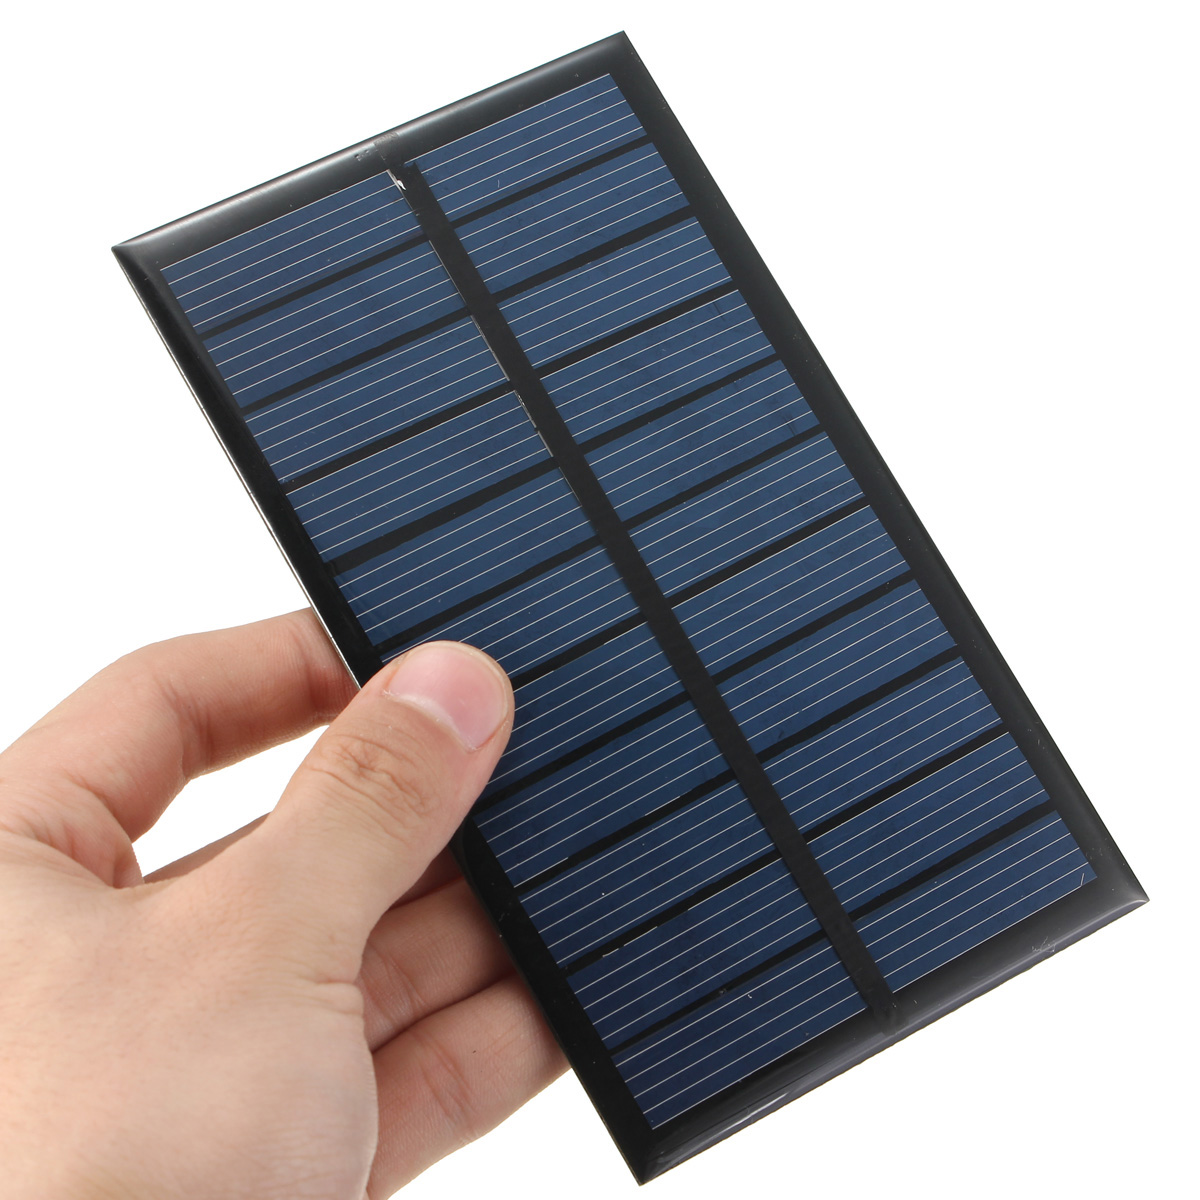 HAOFEI Mini Solar Panel Module System Epoxy Cell Charger DIY 1.6W 5.5V 